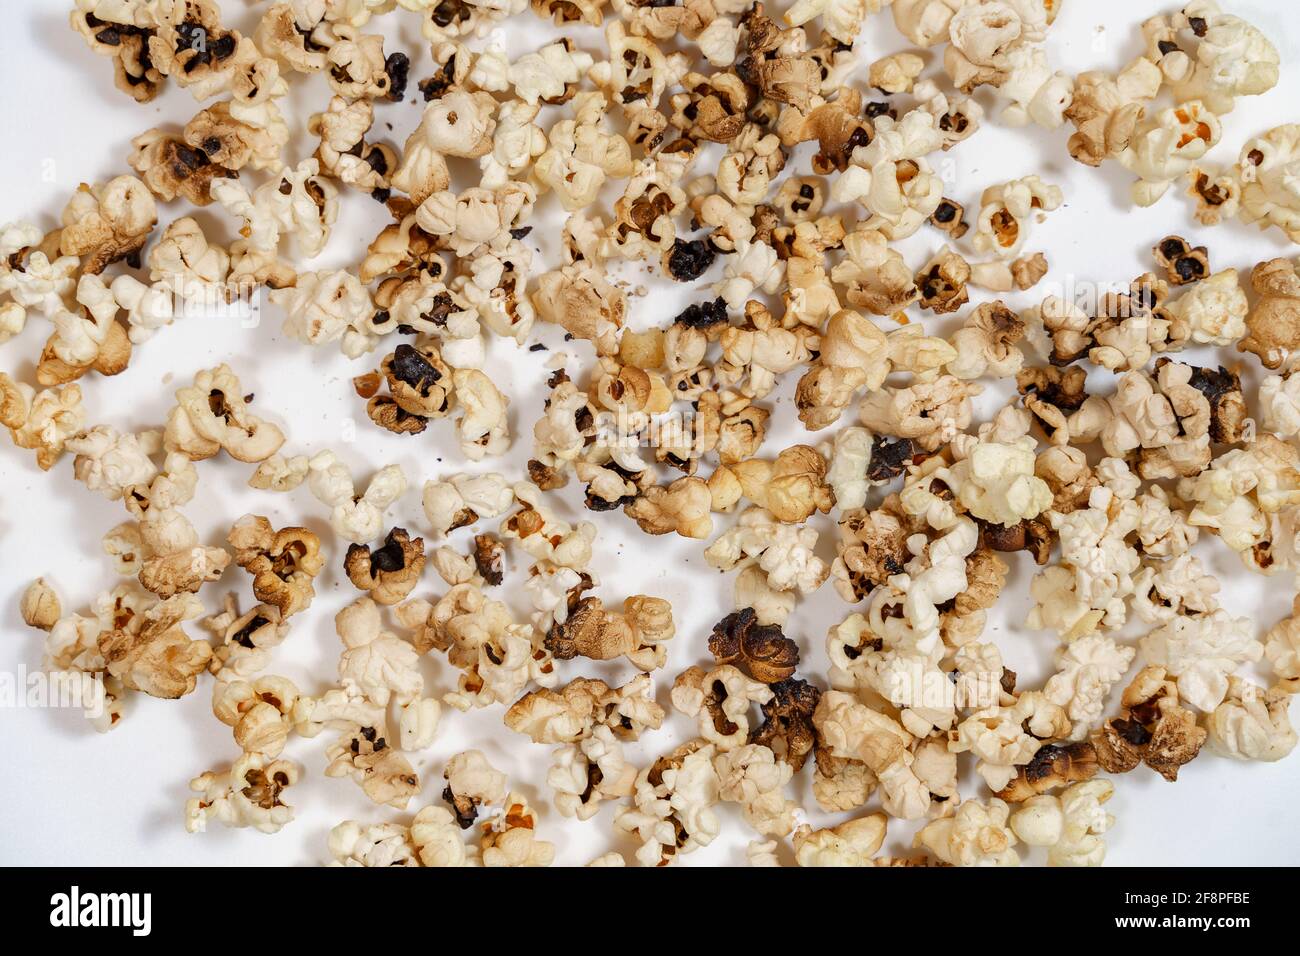 spoiled burnt grains of popcorn close-up. Stock Photo